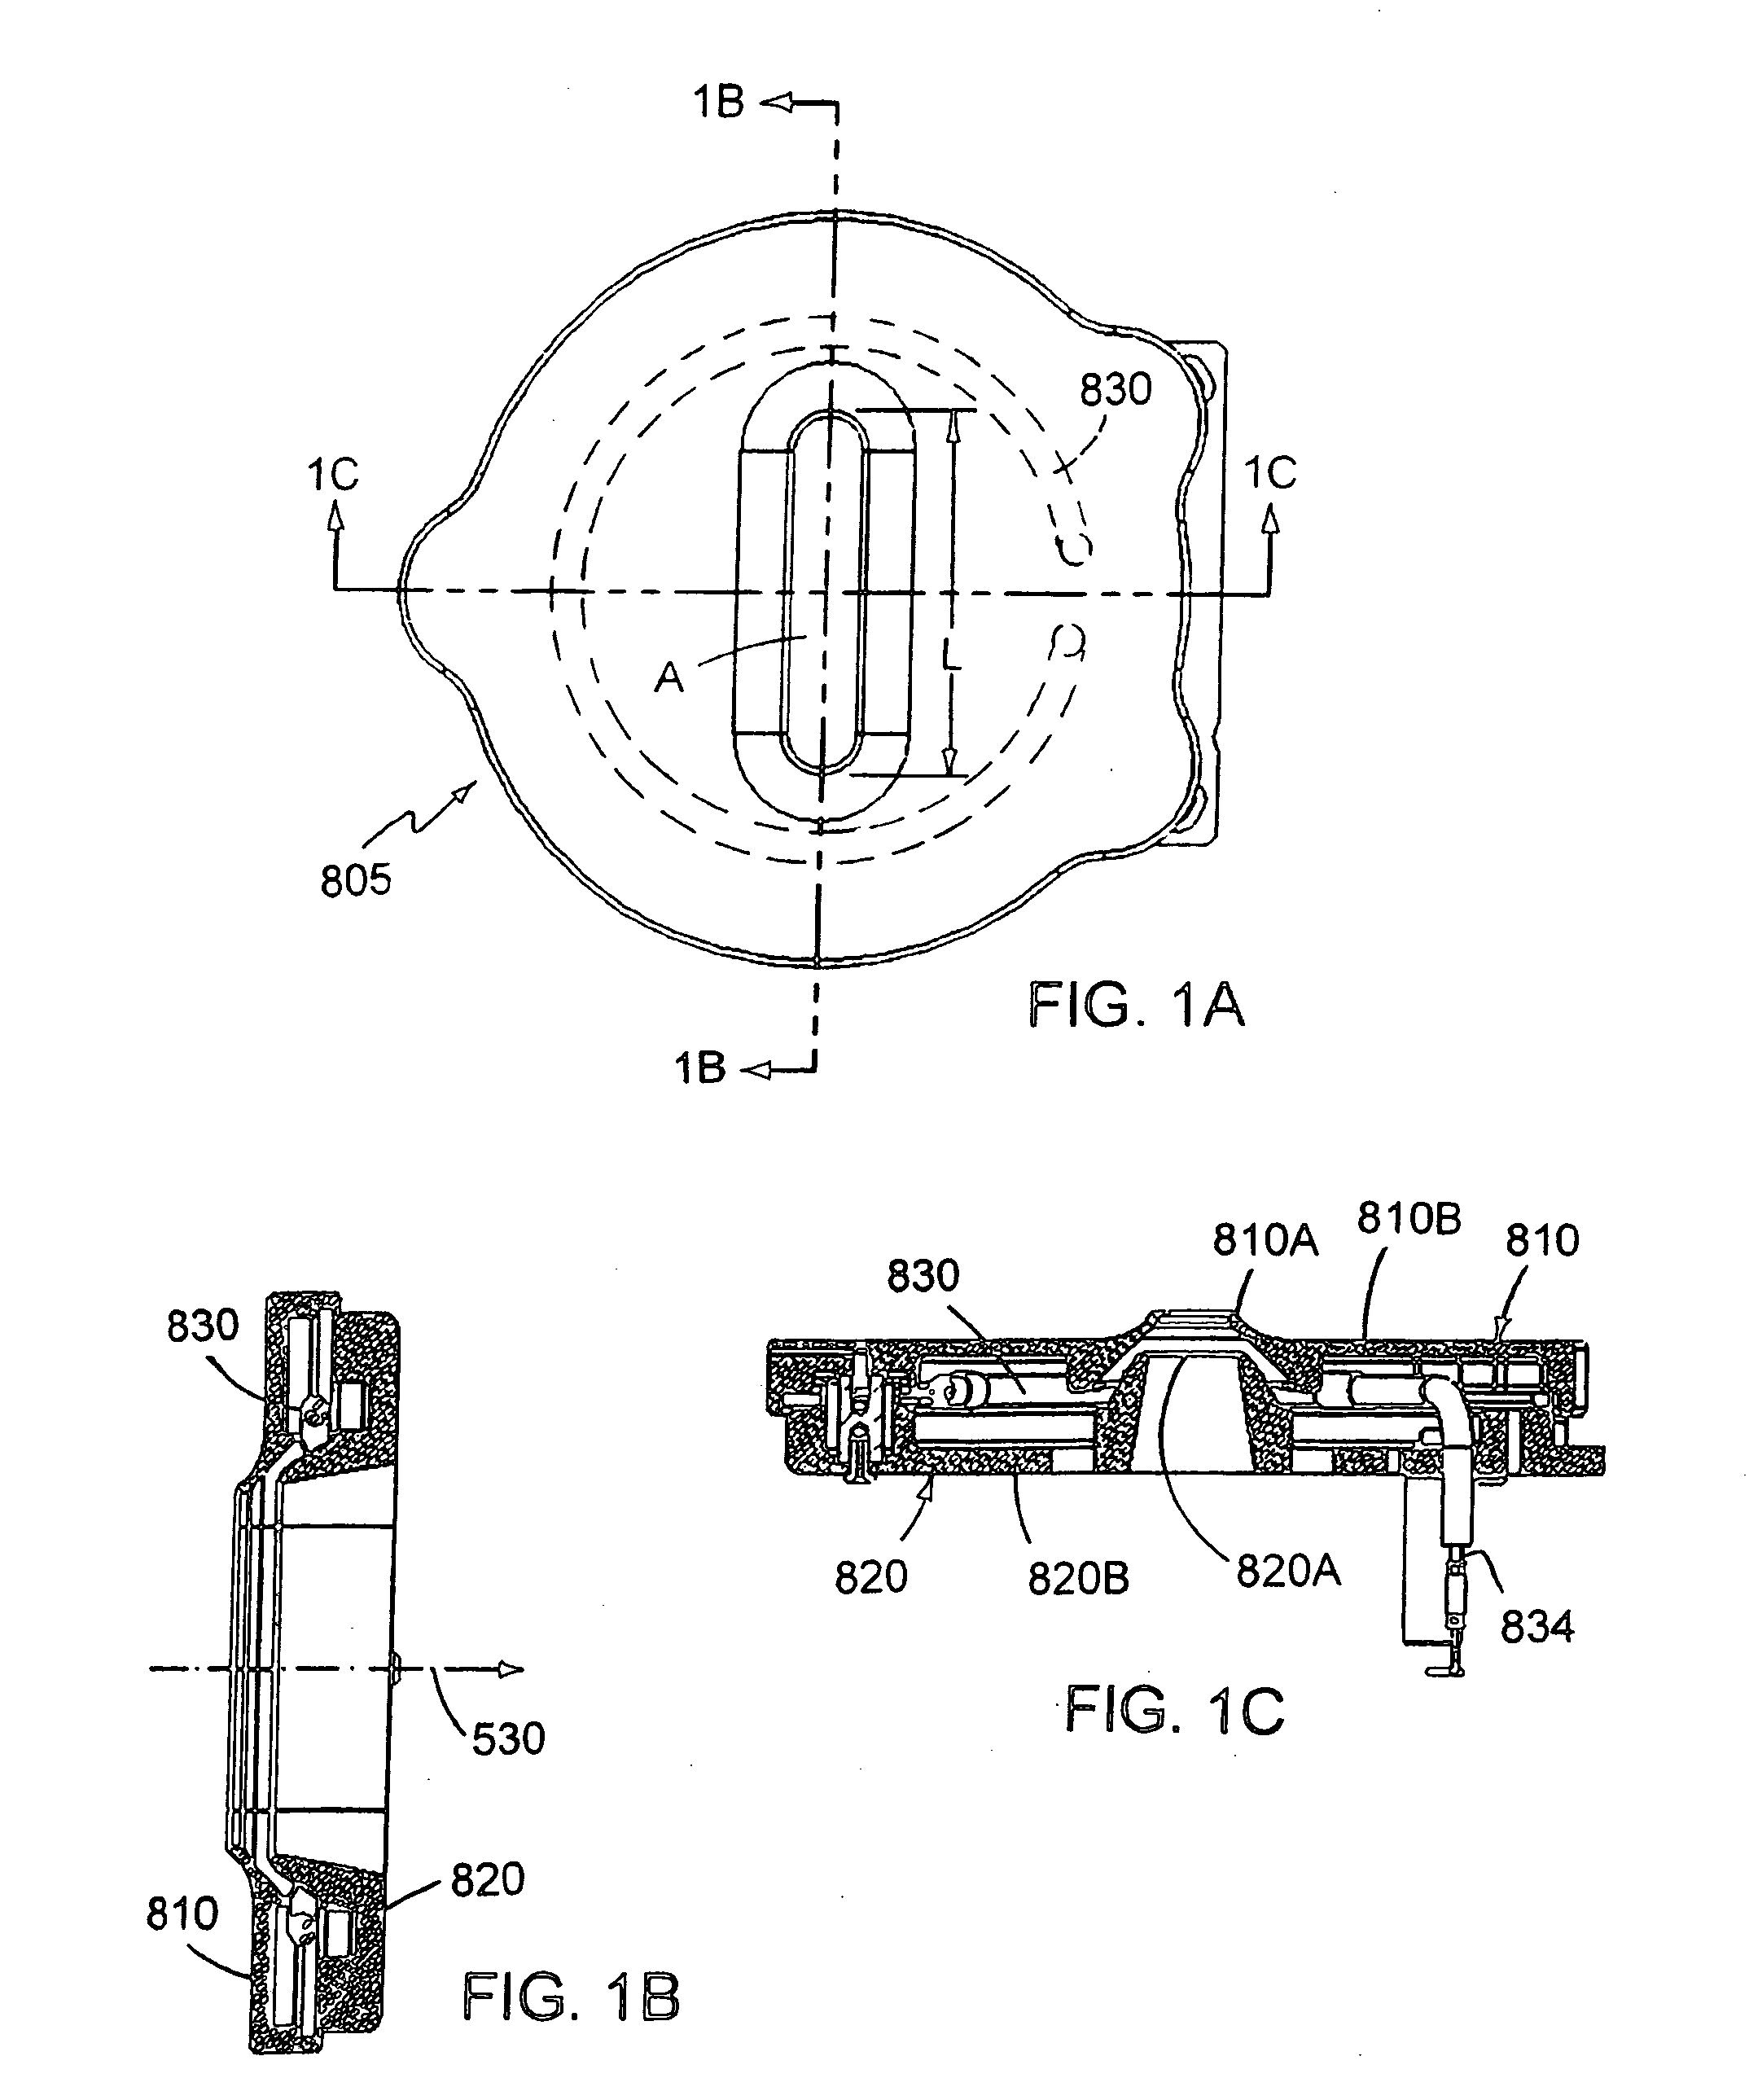 Method and apparatus for extracting ions from an ion source for use in ion implantation